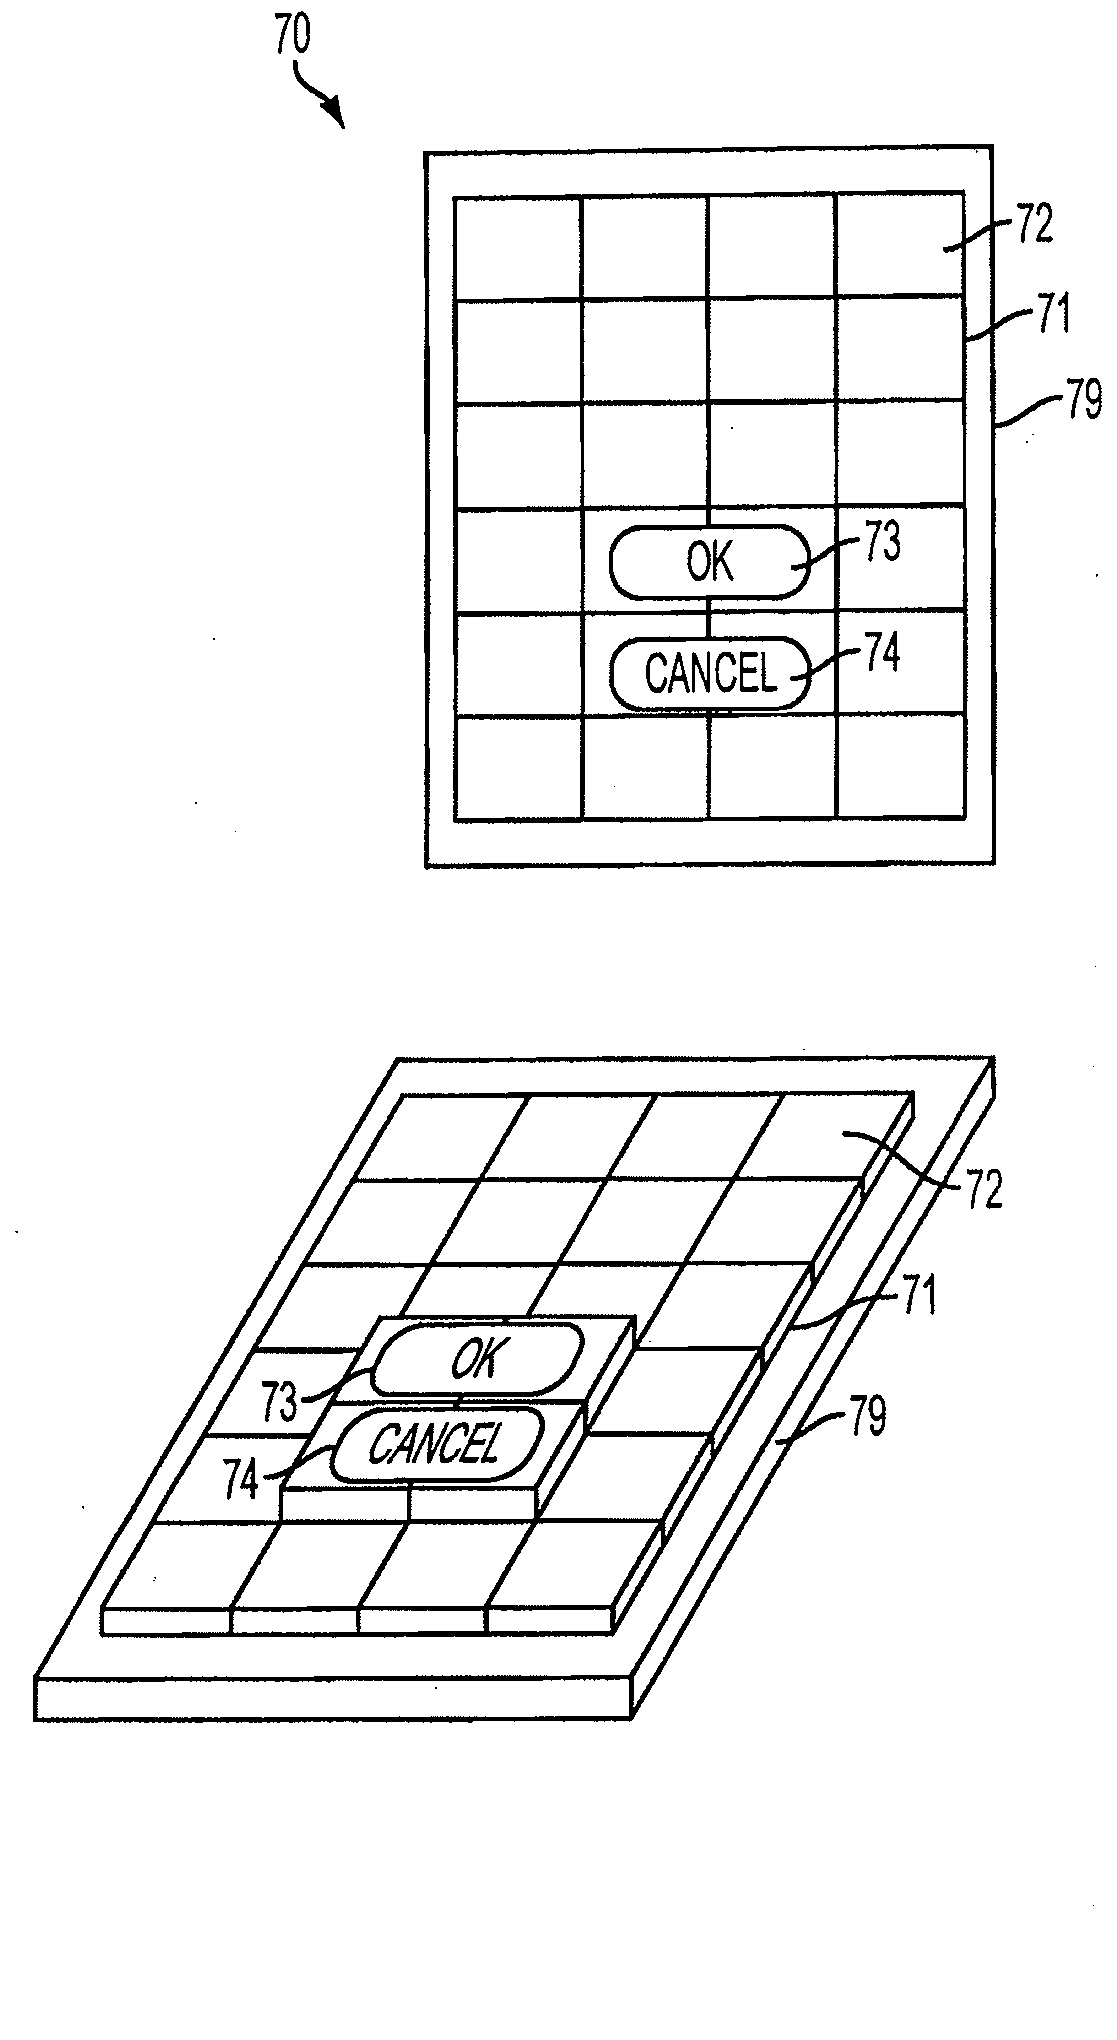 User interface having changeable topography